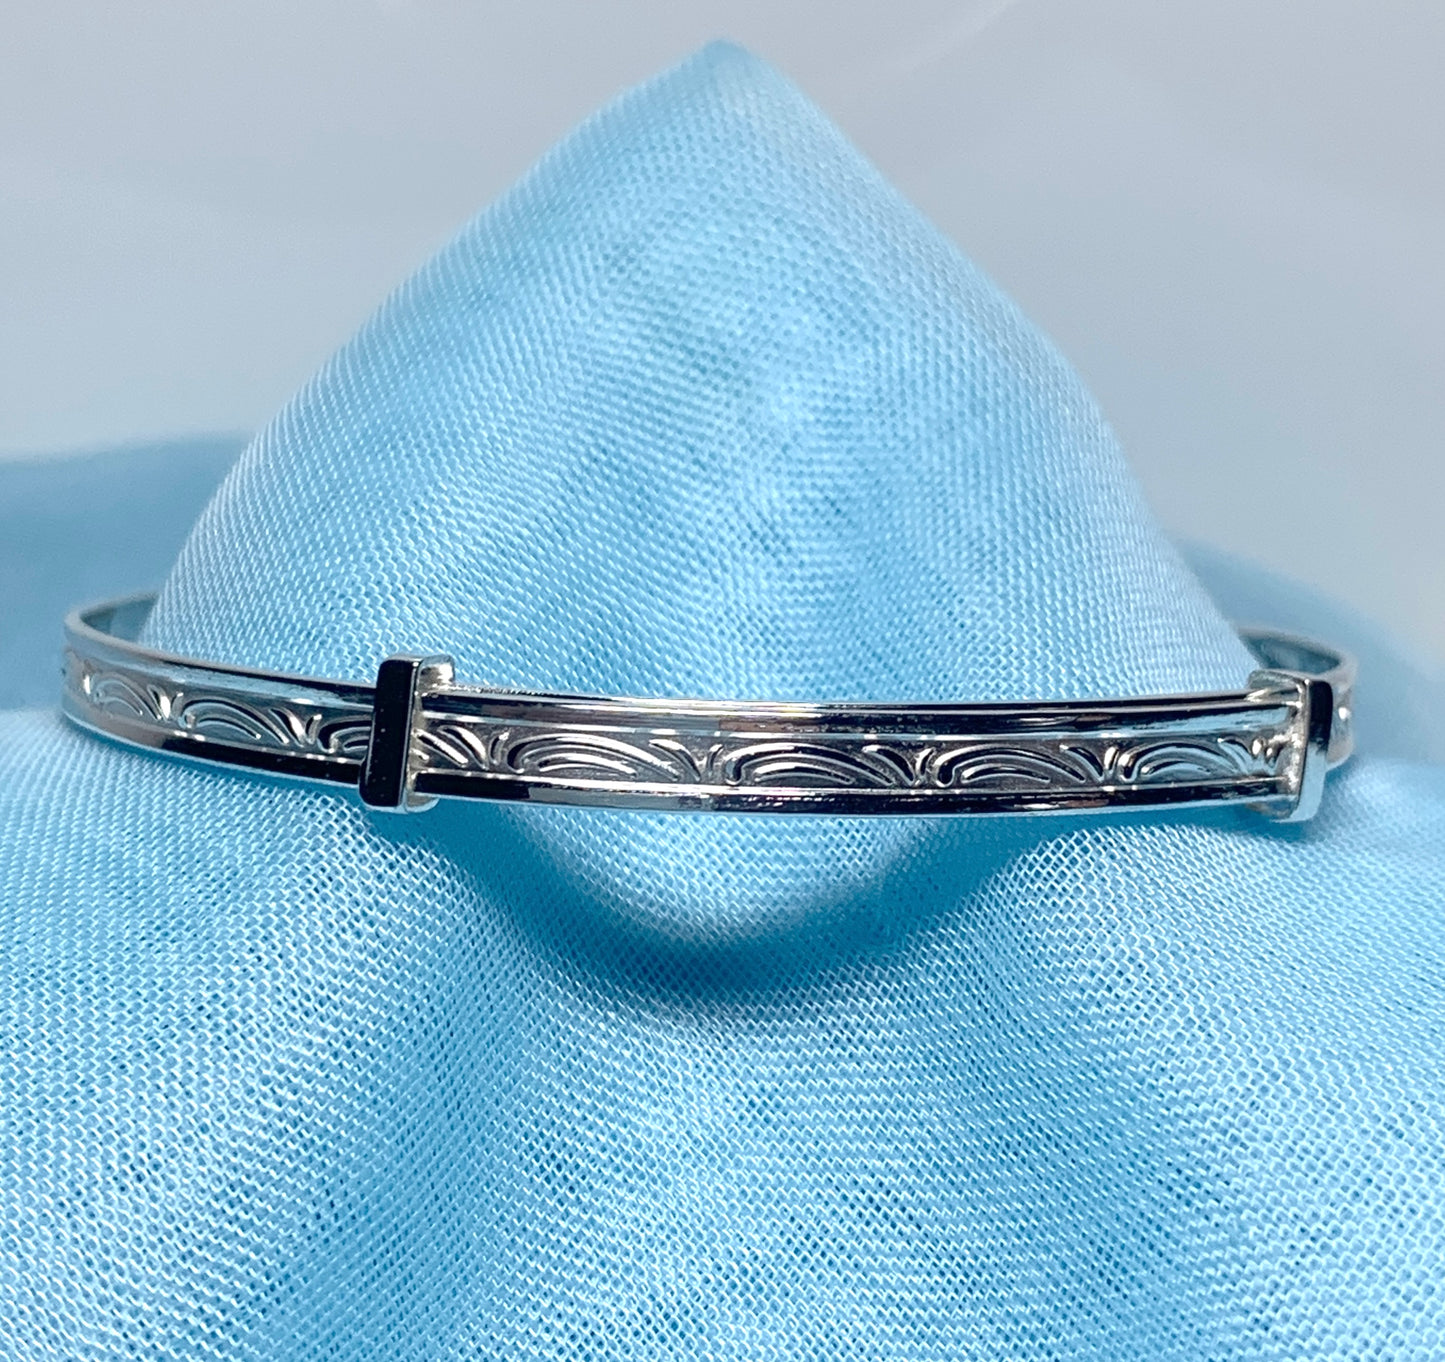 Child’s expanding bangle swirl patterned design sterling silver